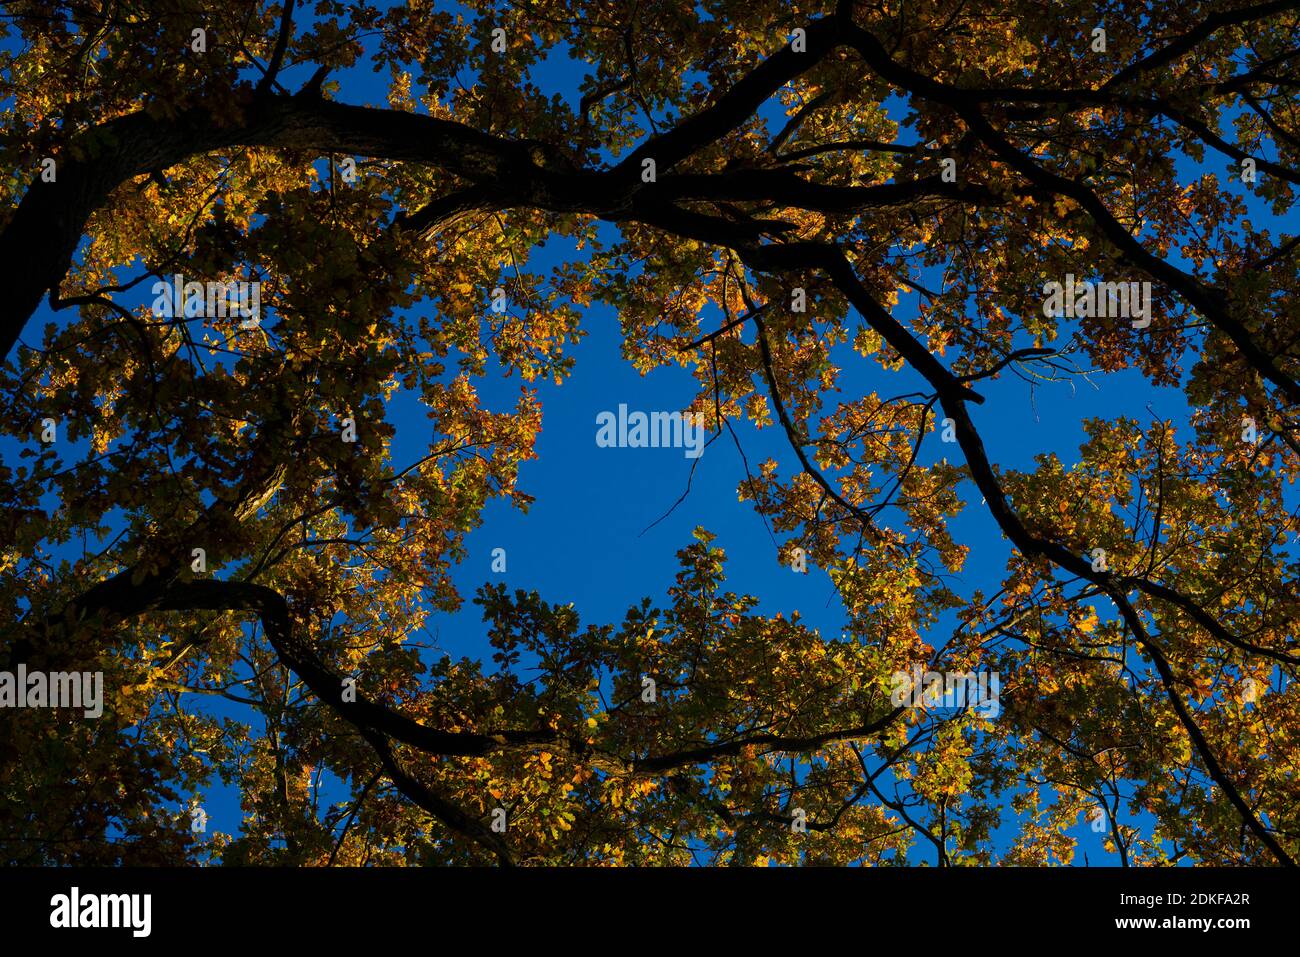 Treetop of a large oak tree in autumn, leaves with beautiful autumn colors, blue sky in the background Stock Photo